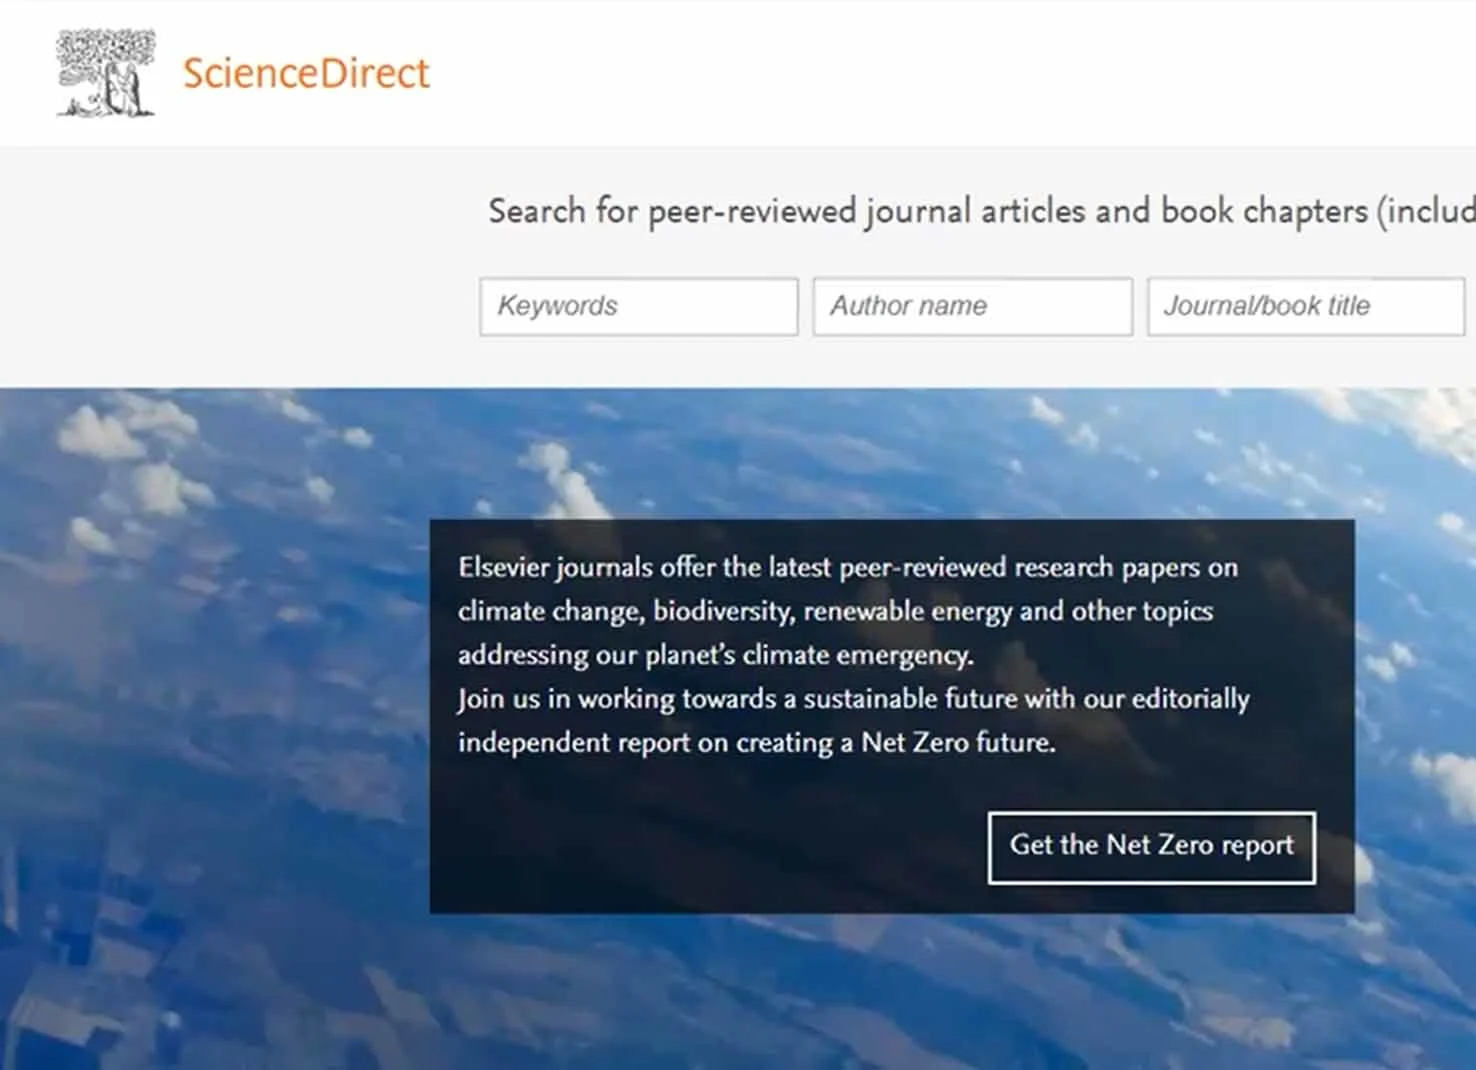 ScienceDirect: a general introduction